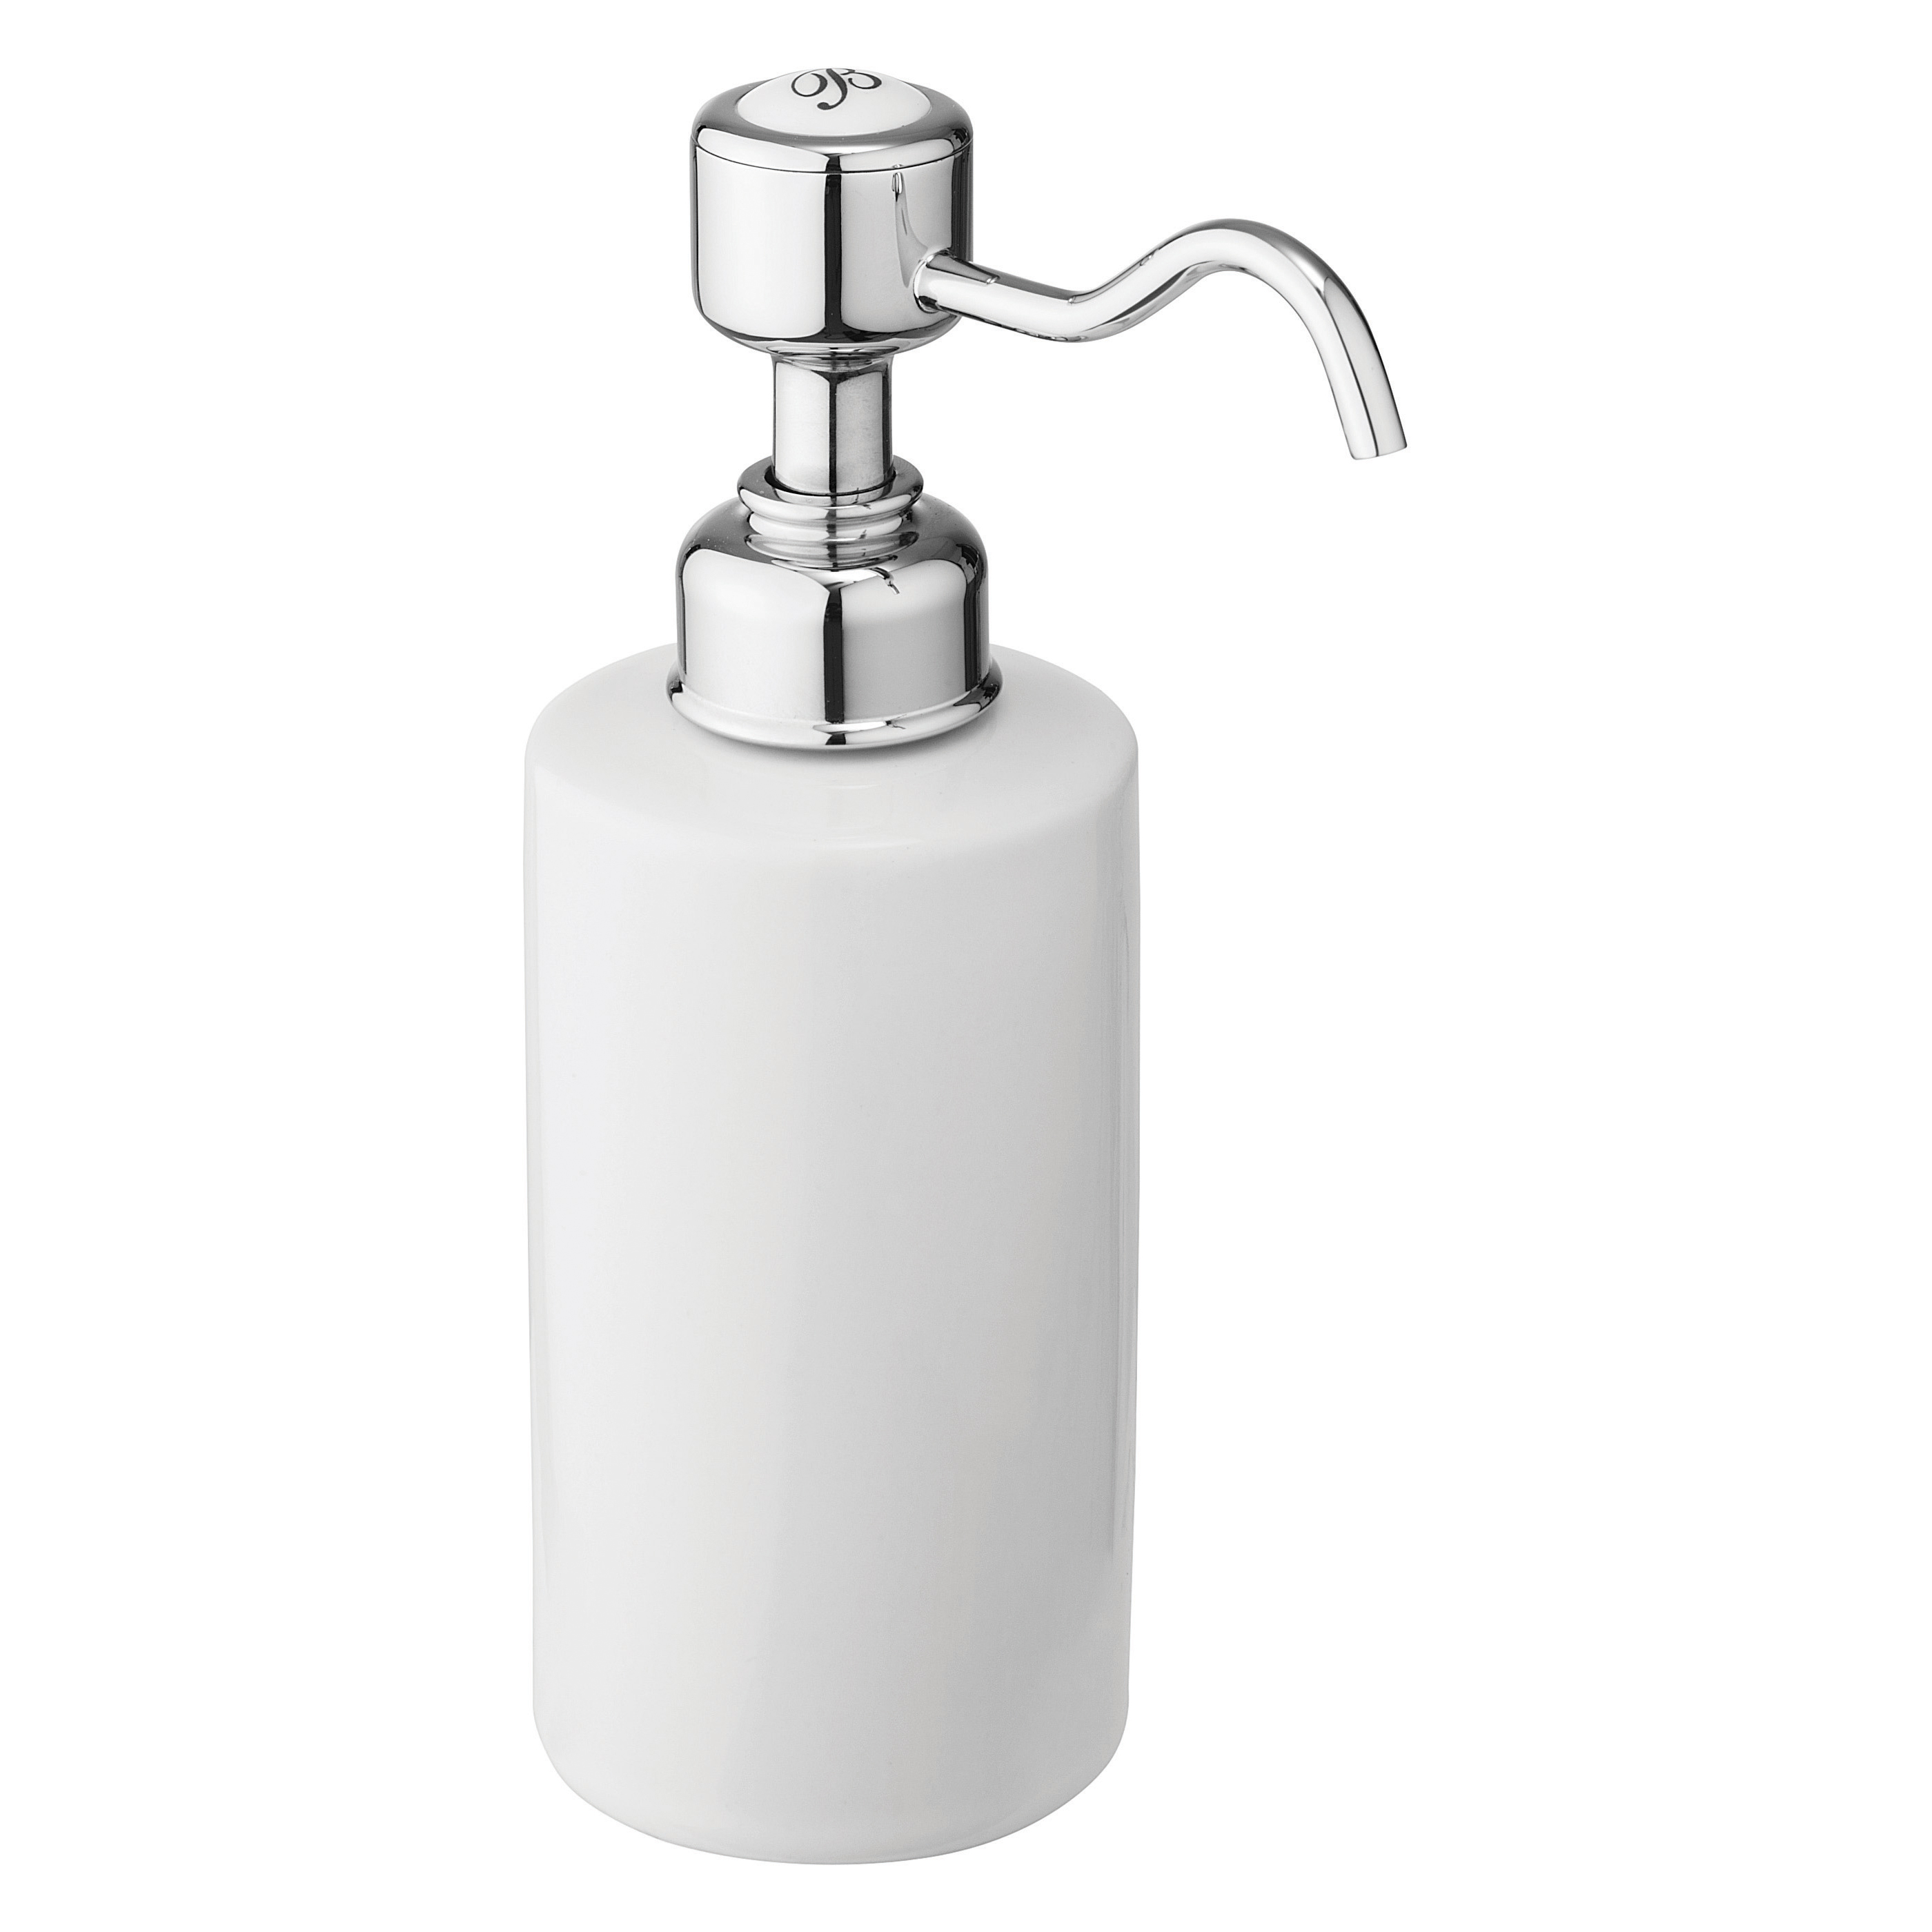 Surface mounted soap dispenser